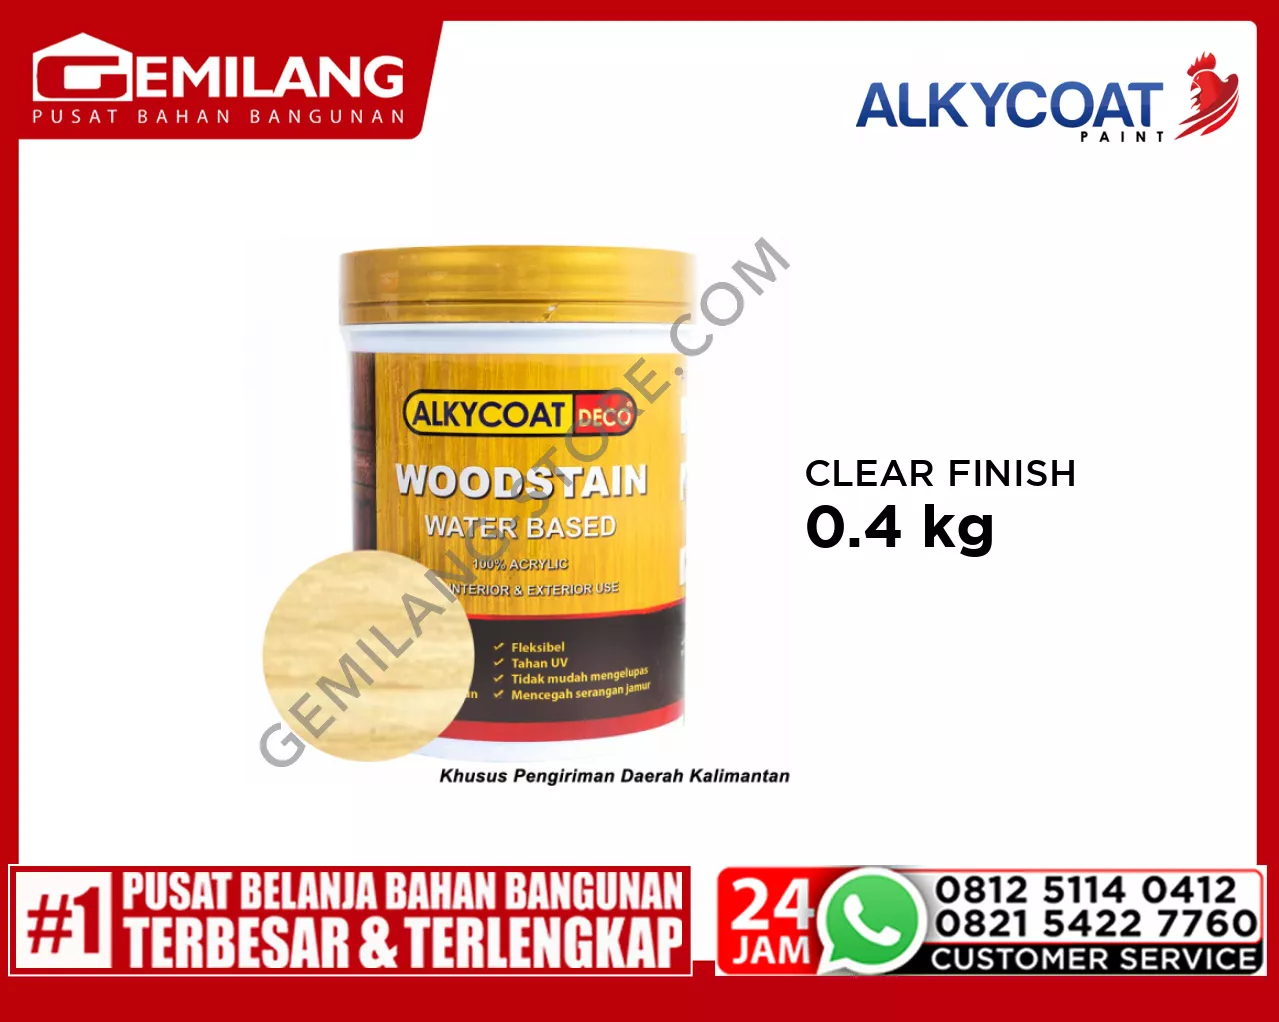 NEO ALKYCOAT DECO WOODSTAIN CLEAR FINISH 0.4kg